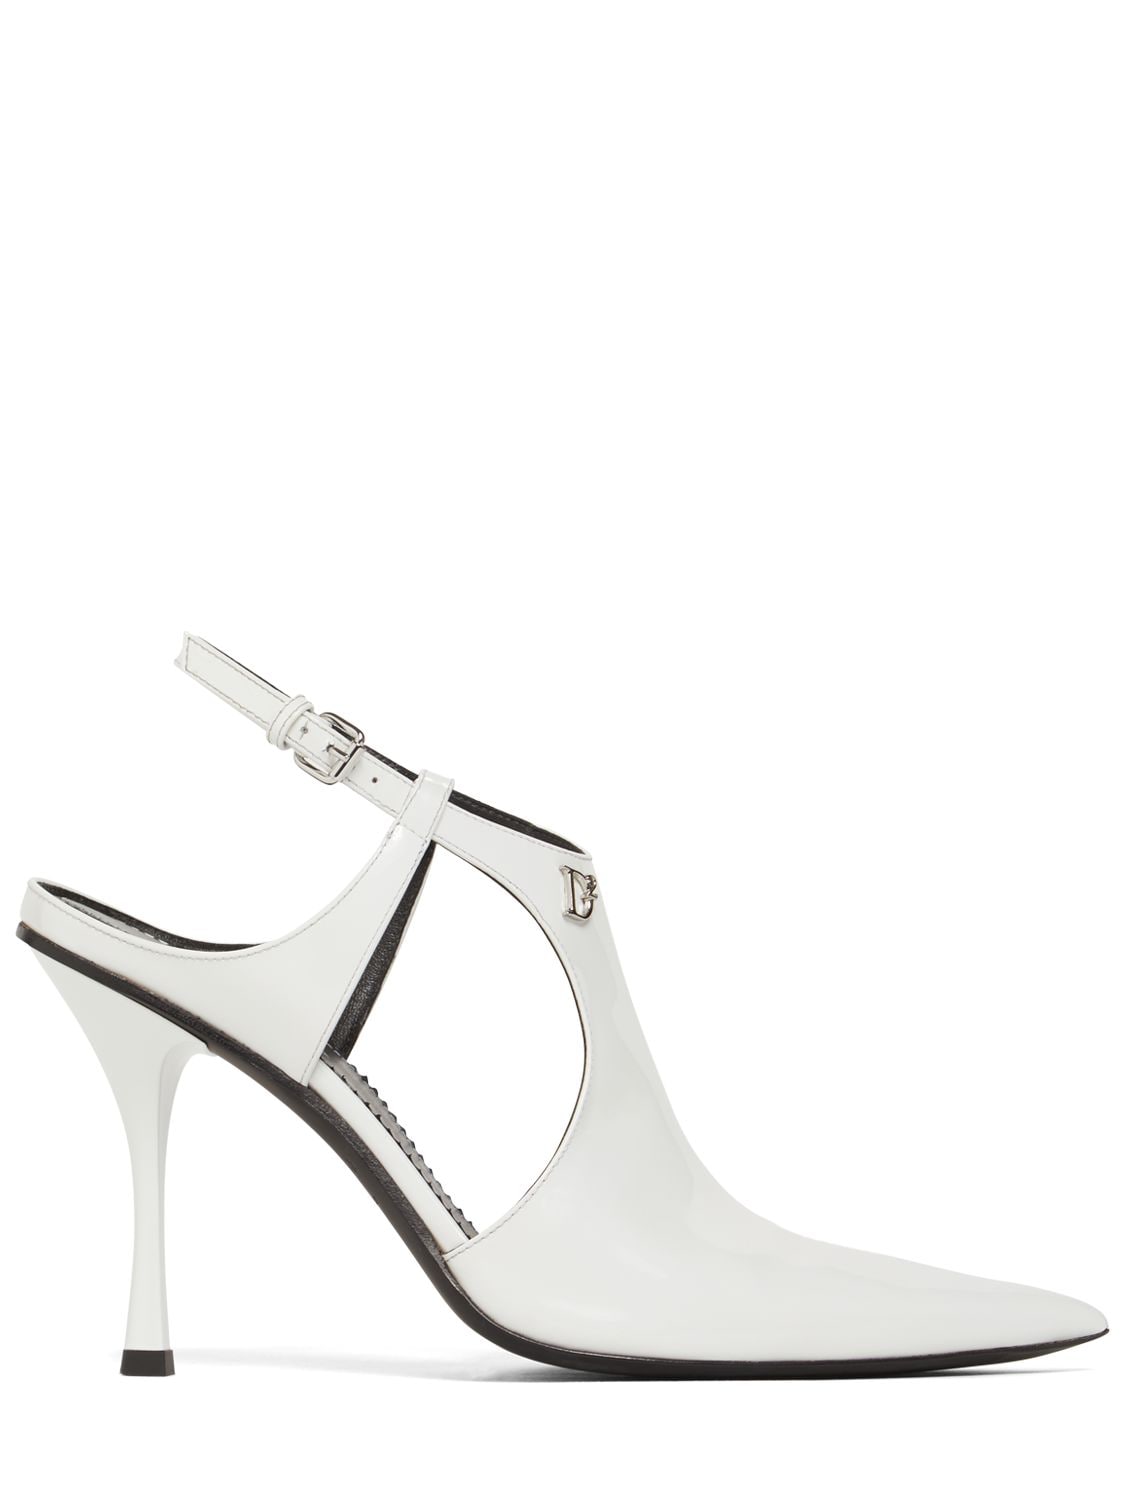 DSQUARED2 100MM PATENT LEATHER SLINGBACK PUMPS